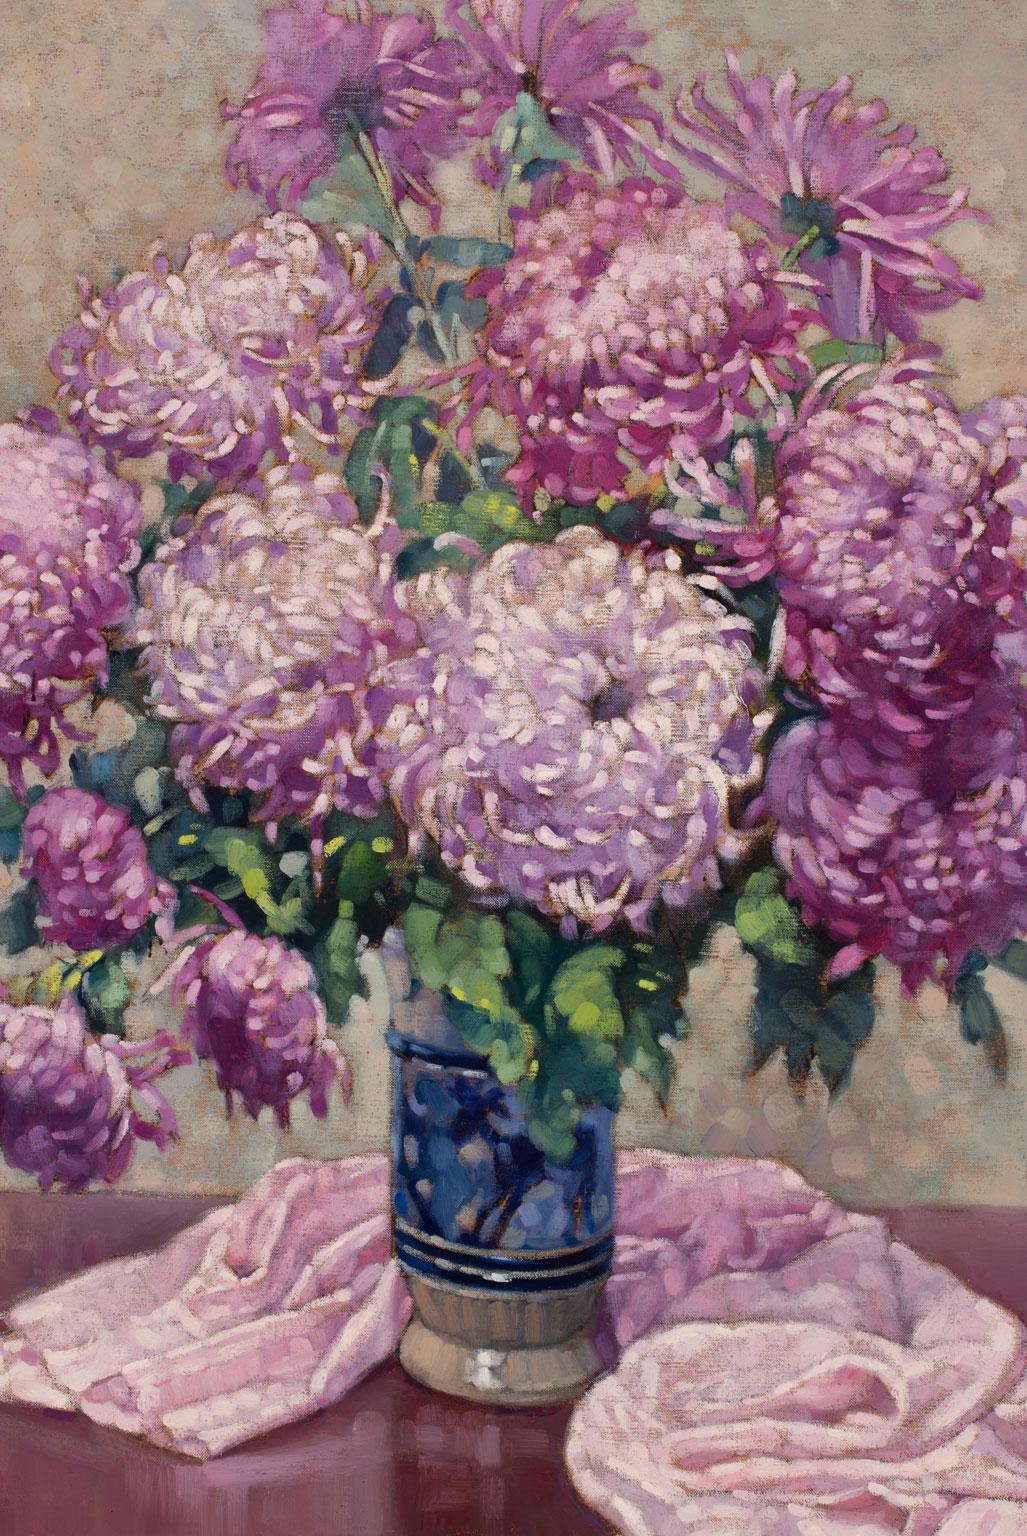 Untitled Floralscape [Vase Aux Chrysanthèmes Violets], an original oil on canvas by Paul Terpereau, is a piece for the true collector. Terpereau's use of bold colors and rhythmic brush strokes immediately grabs the viewer's attention, highlighting